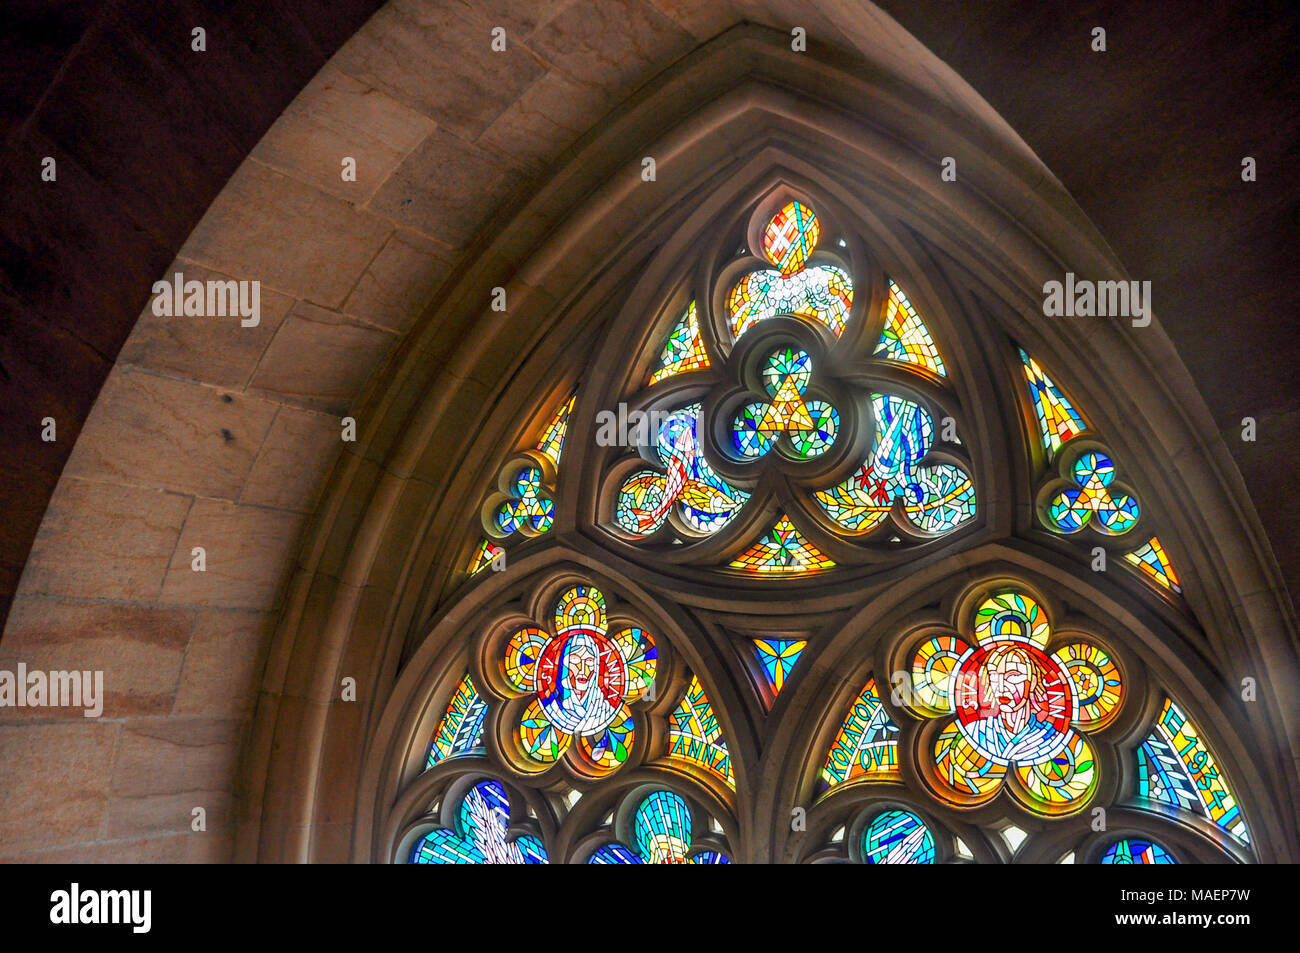 Beautiful Stained glass window detail Stock Photo